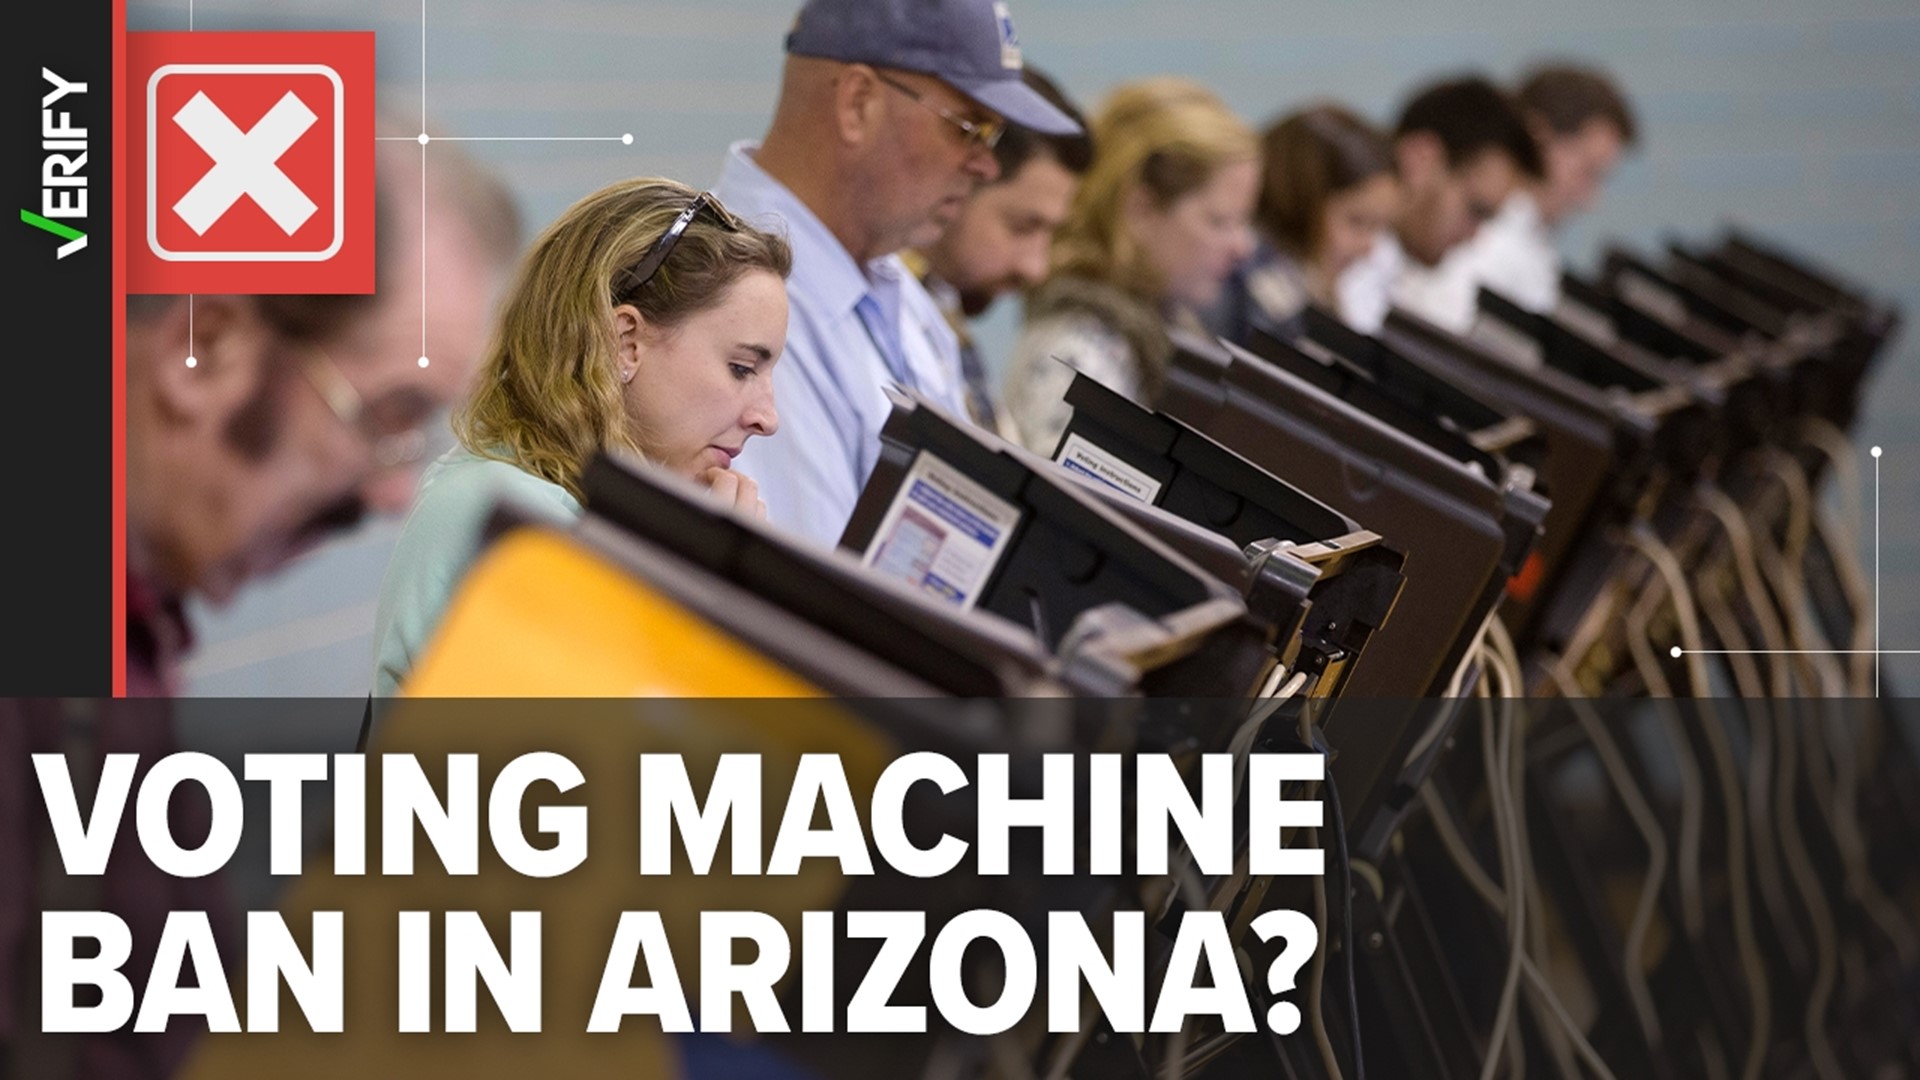 Arizona SCR 1037 desires to block counties from using electronic voting systems made outside the U.S. in upcoming federal elections, but it’s not a state law.